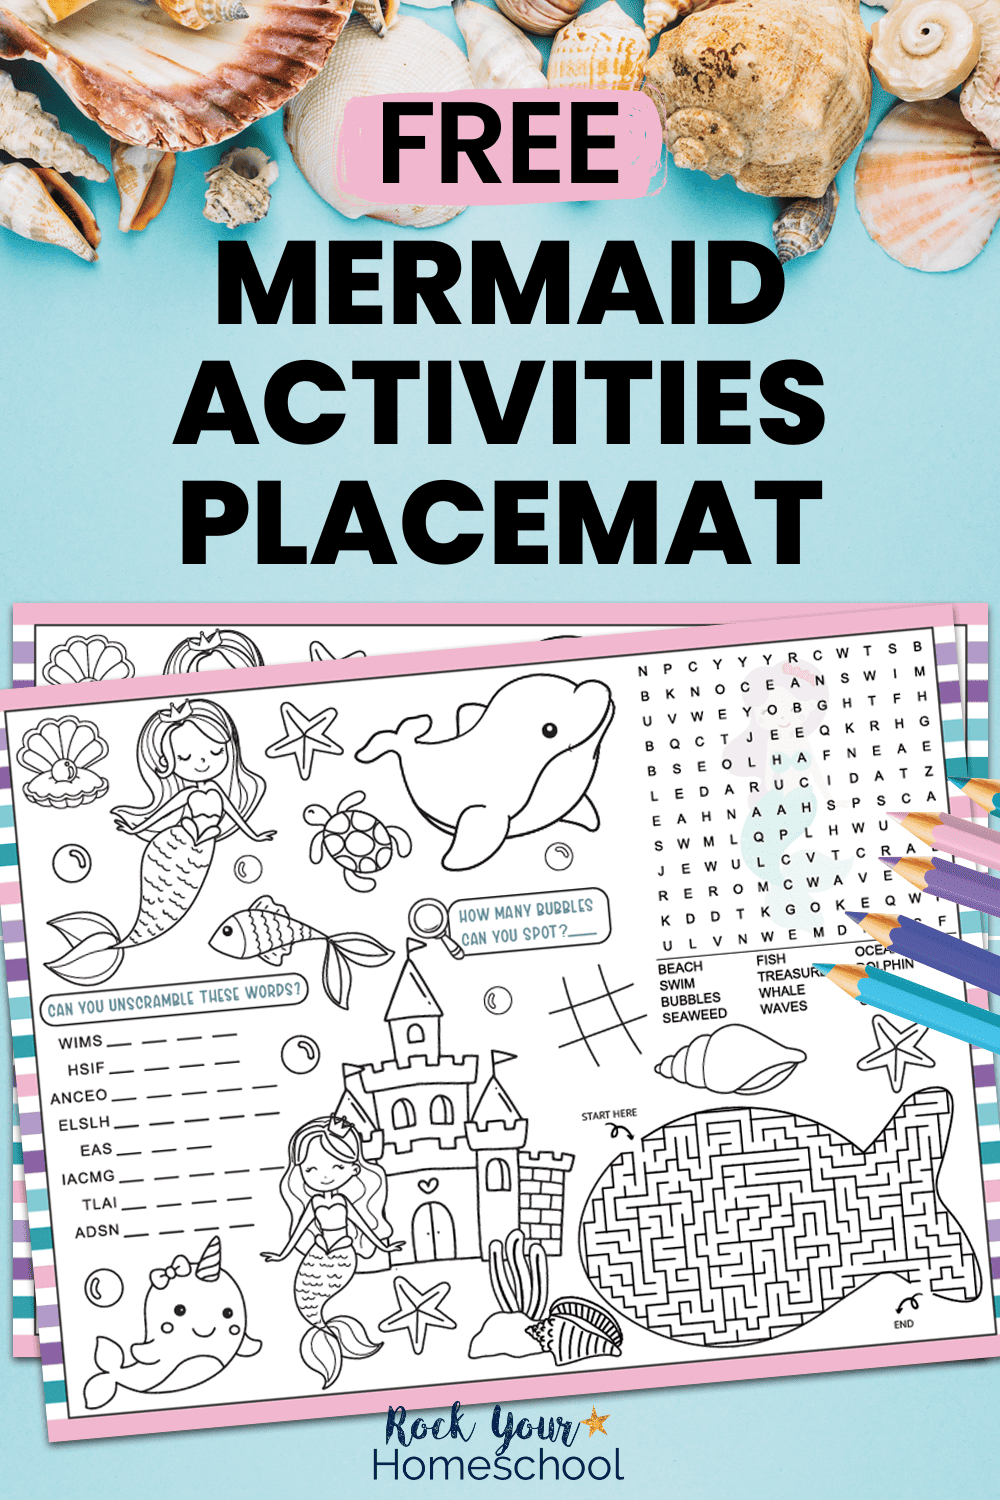 Free printable mermaid activities placemats on blue background with shells.